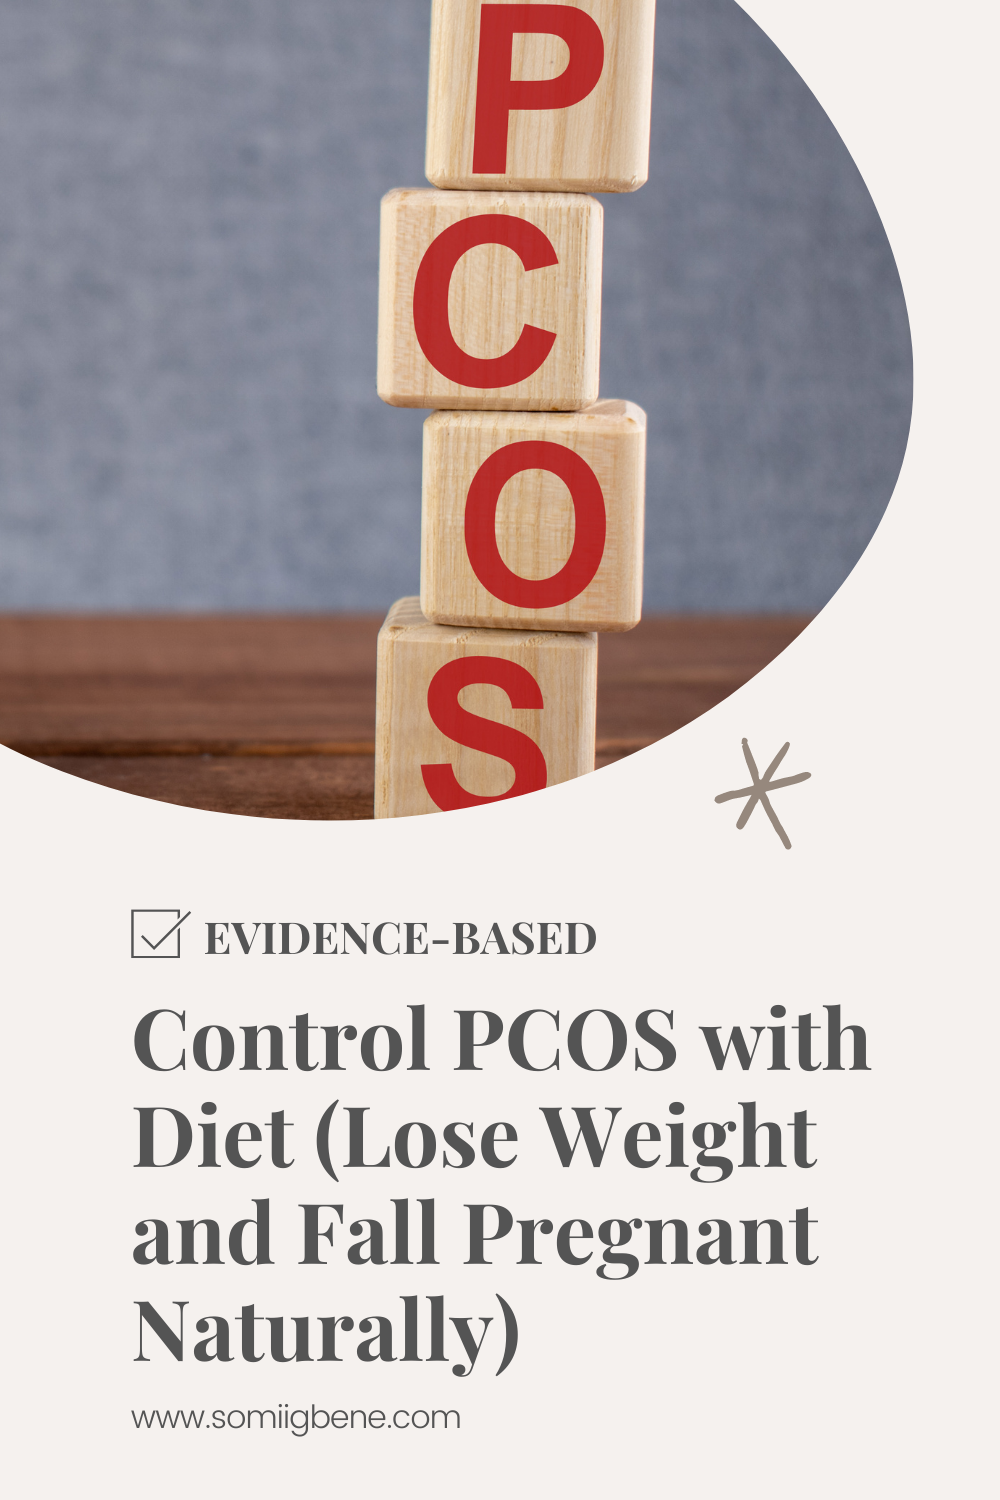 Control PCOS with diet (lose weight and fall pregnant naturally)